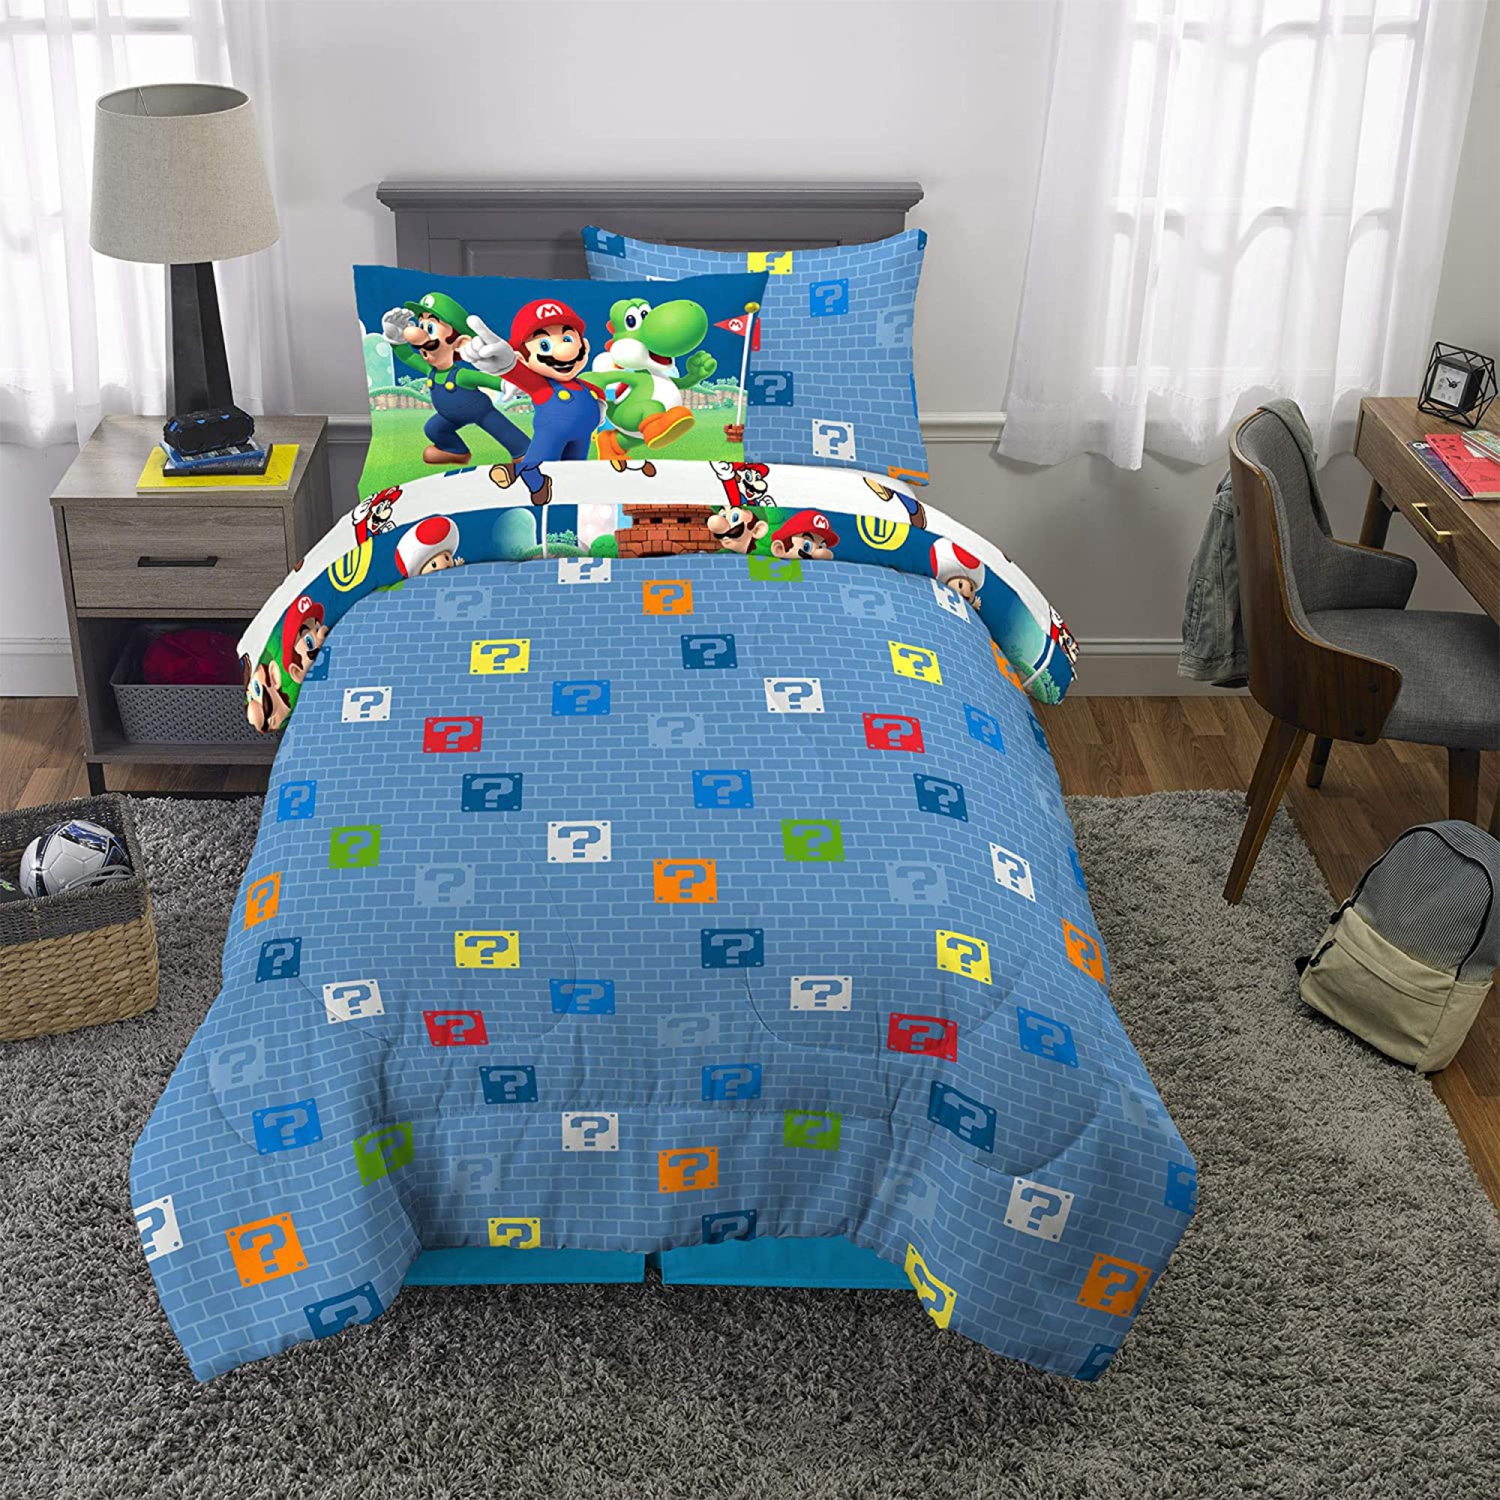 Super Mario Twin Sheet Set - 5 Pcs Bed Sheet with Reversible Comforter - Kids Bedding Sheet Set Flat Fitted Pillowcase with Printed Characters Mario, Luigi, Yoshi and Toad